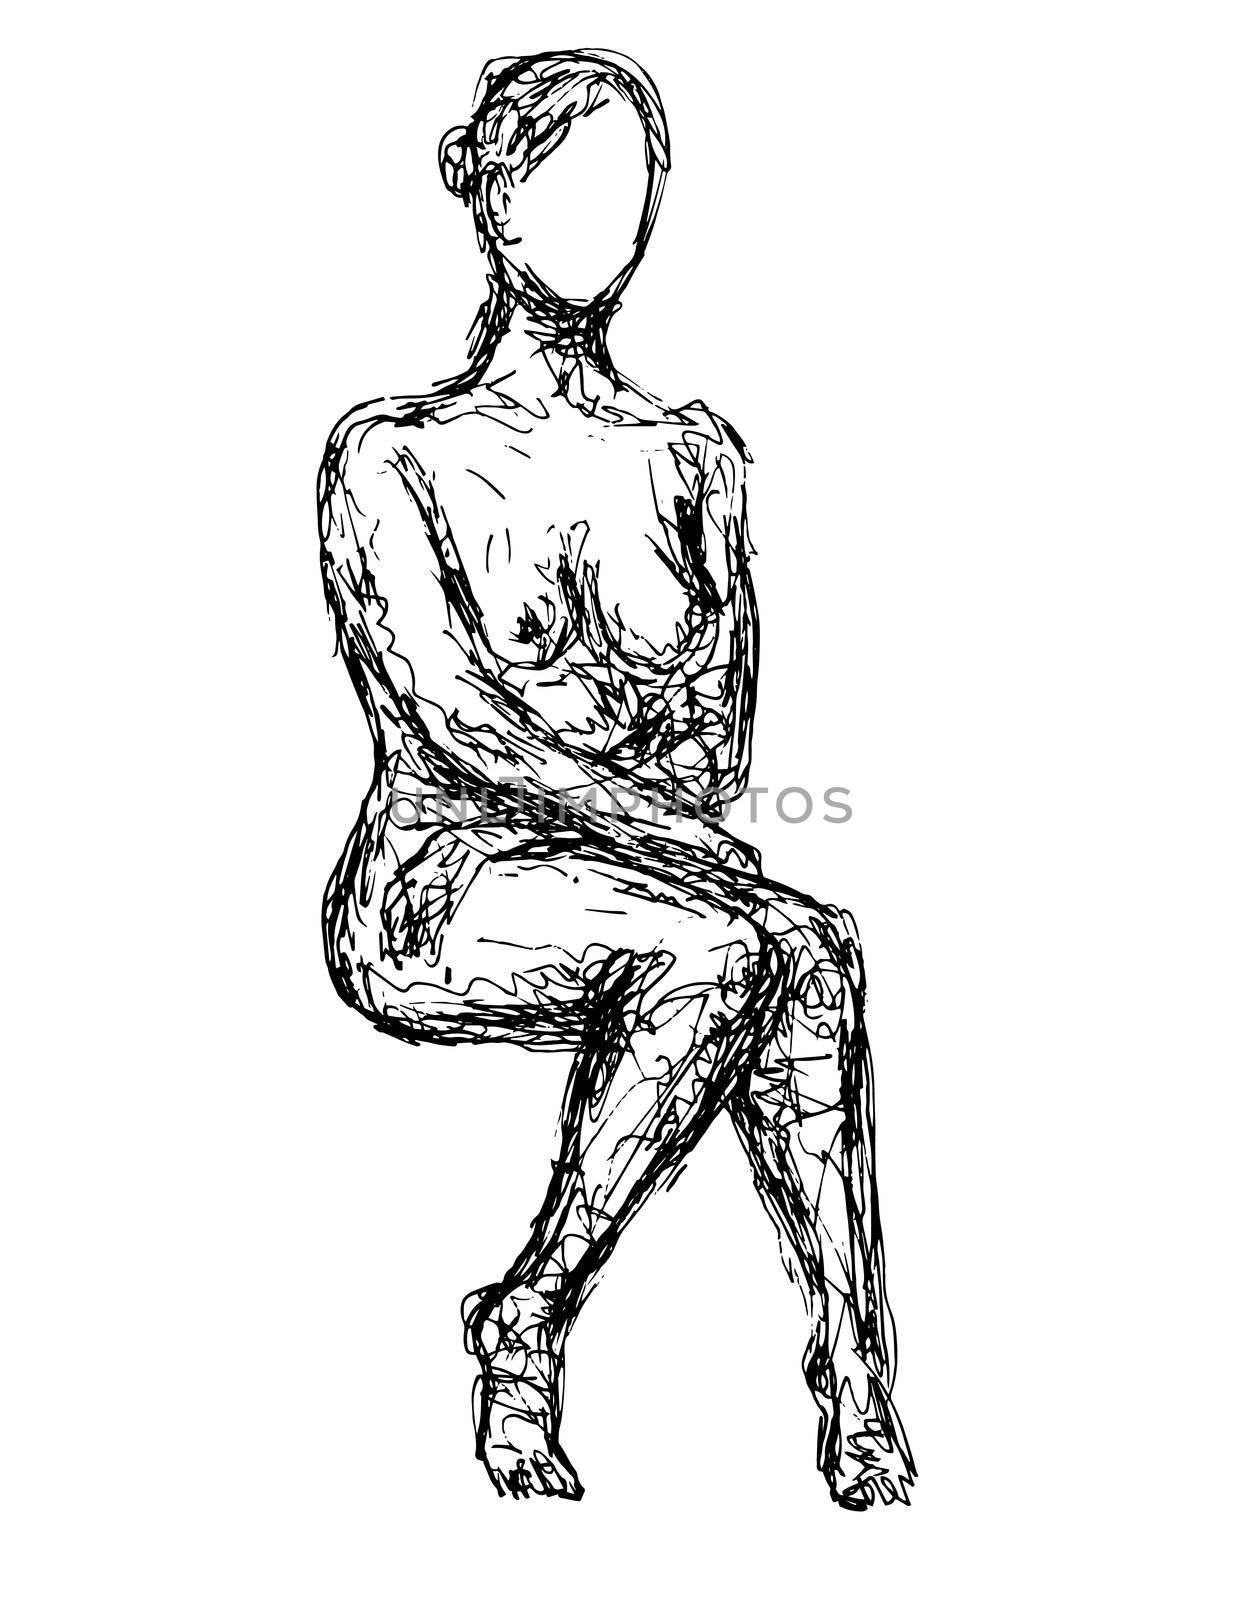 Nude Female Human Figure Sitting Front View Down Doodle Art Continuous Line Drawing by patrimonio